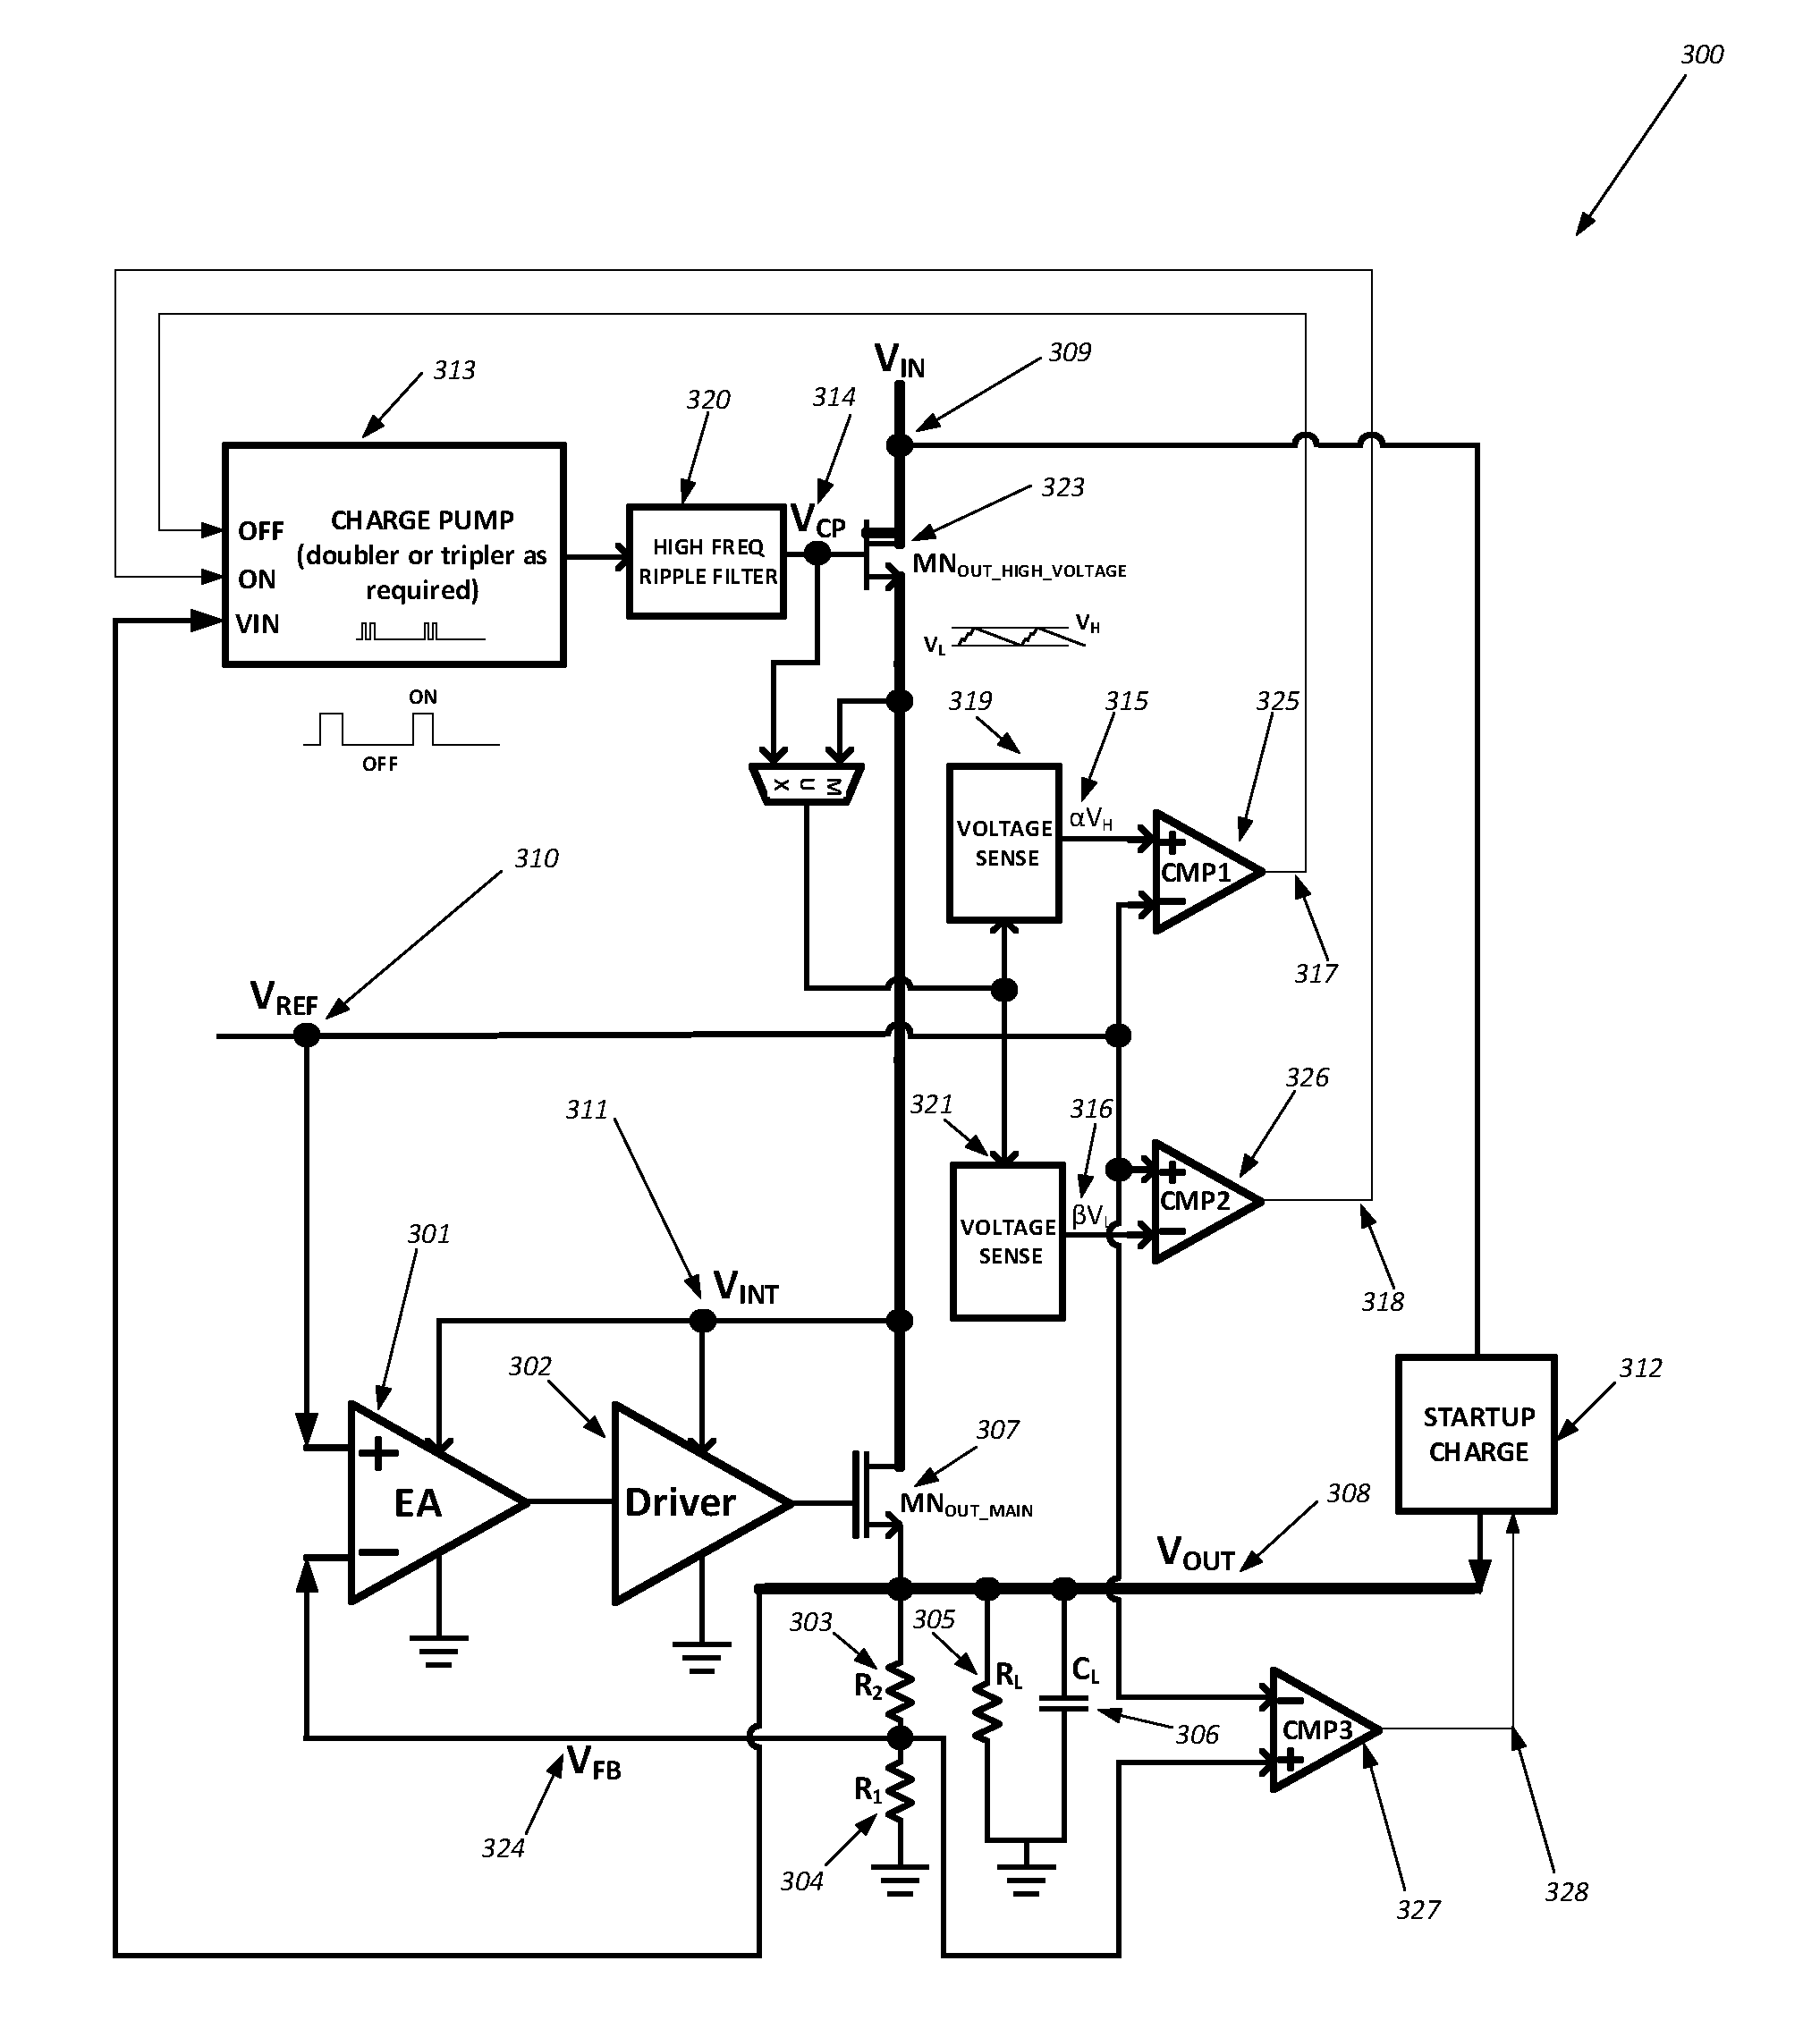 Voltage regulator with dynamic charge pump control